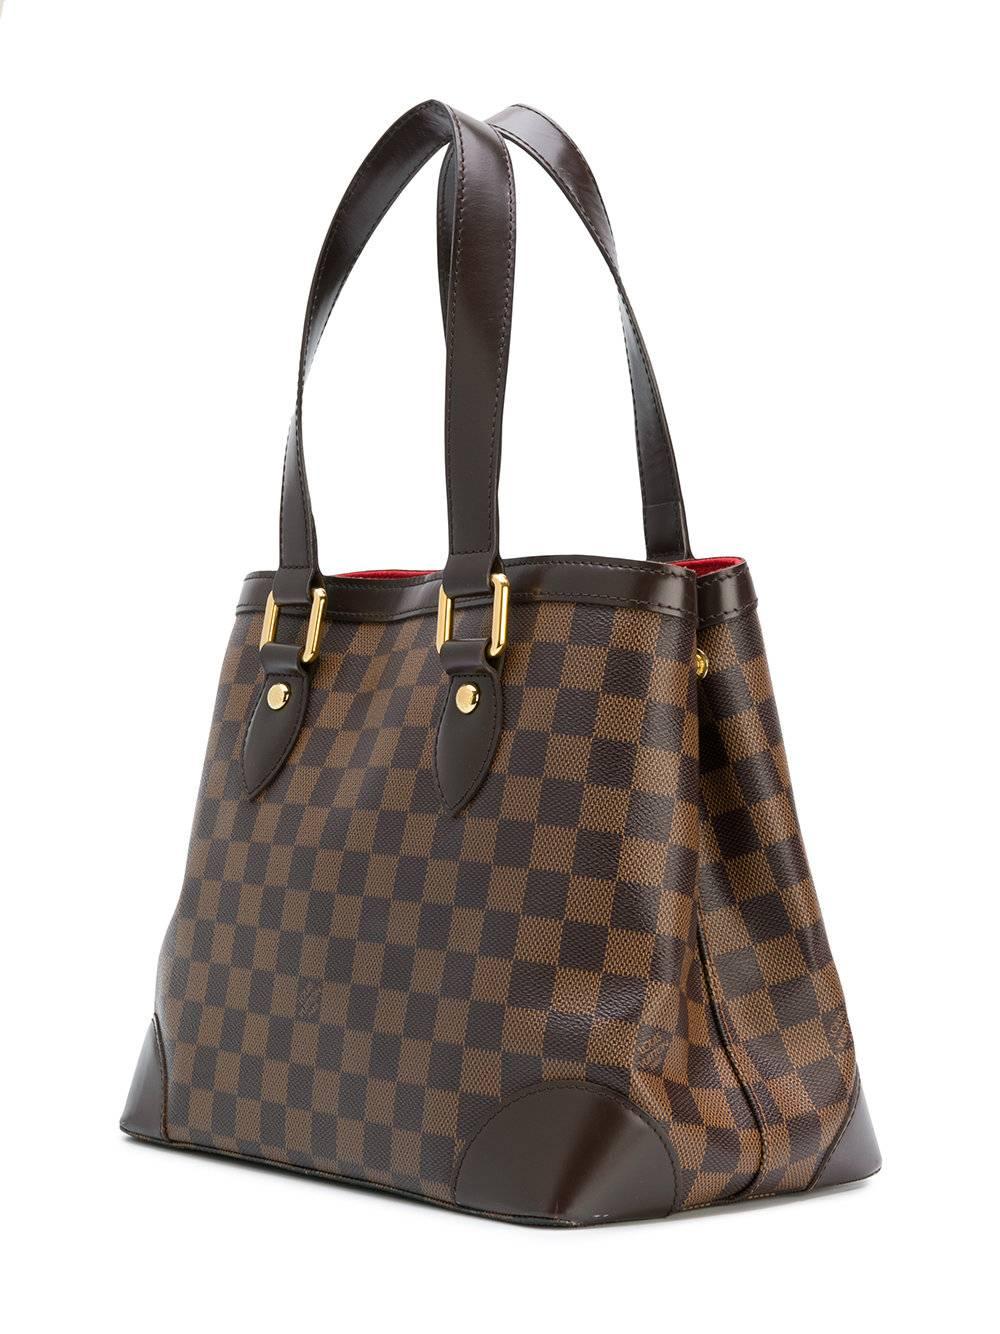 This Louis Vuitton Damier Ebene shoulder bag is the perfect size for day-to-day life. Featuring a beautifully vibrant red suede lining, and interior zip pocket, this bag is stylish yet practical. The exterior features an eye-catching bold metallic